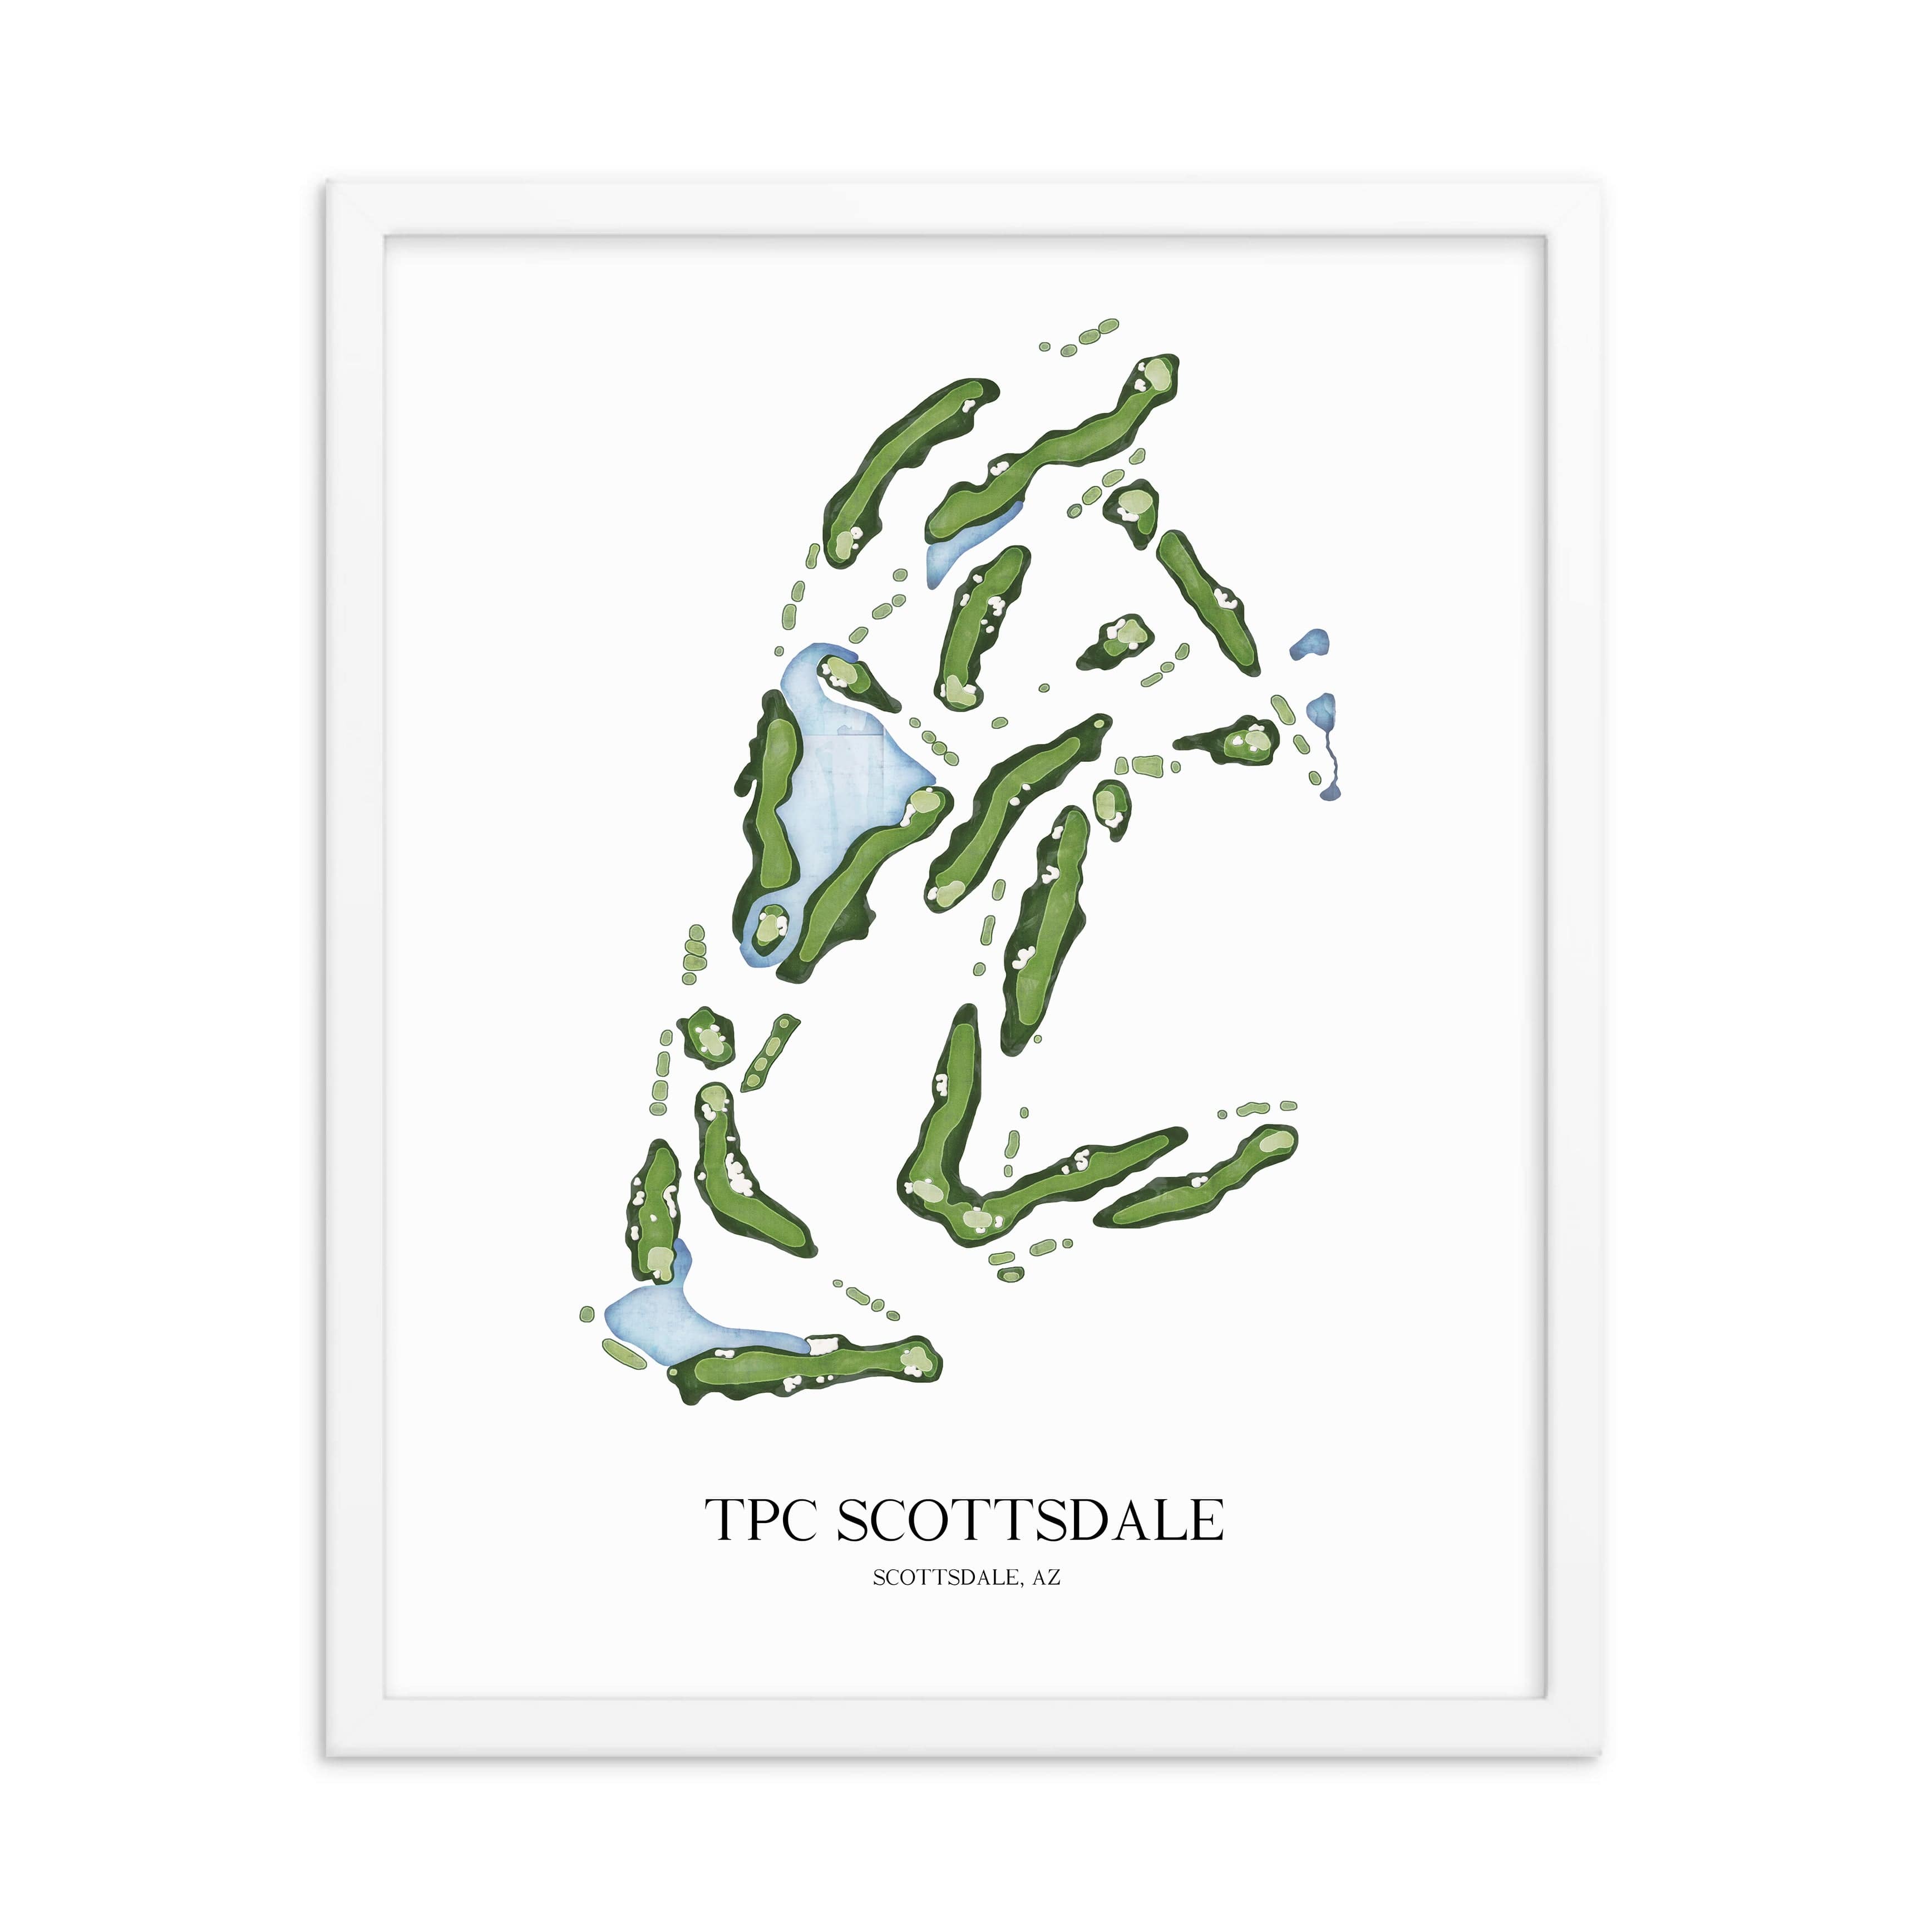 The 19th Hole Golf Shop - Golf Course Prints -  8" x 10" / White TPC Scottsdale Golf Course Map